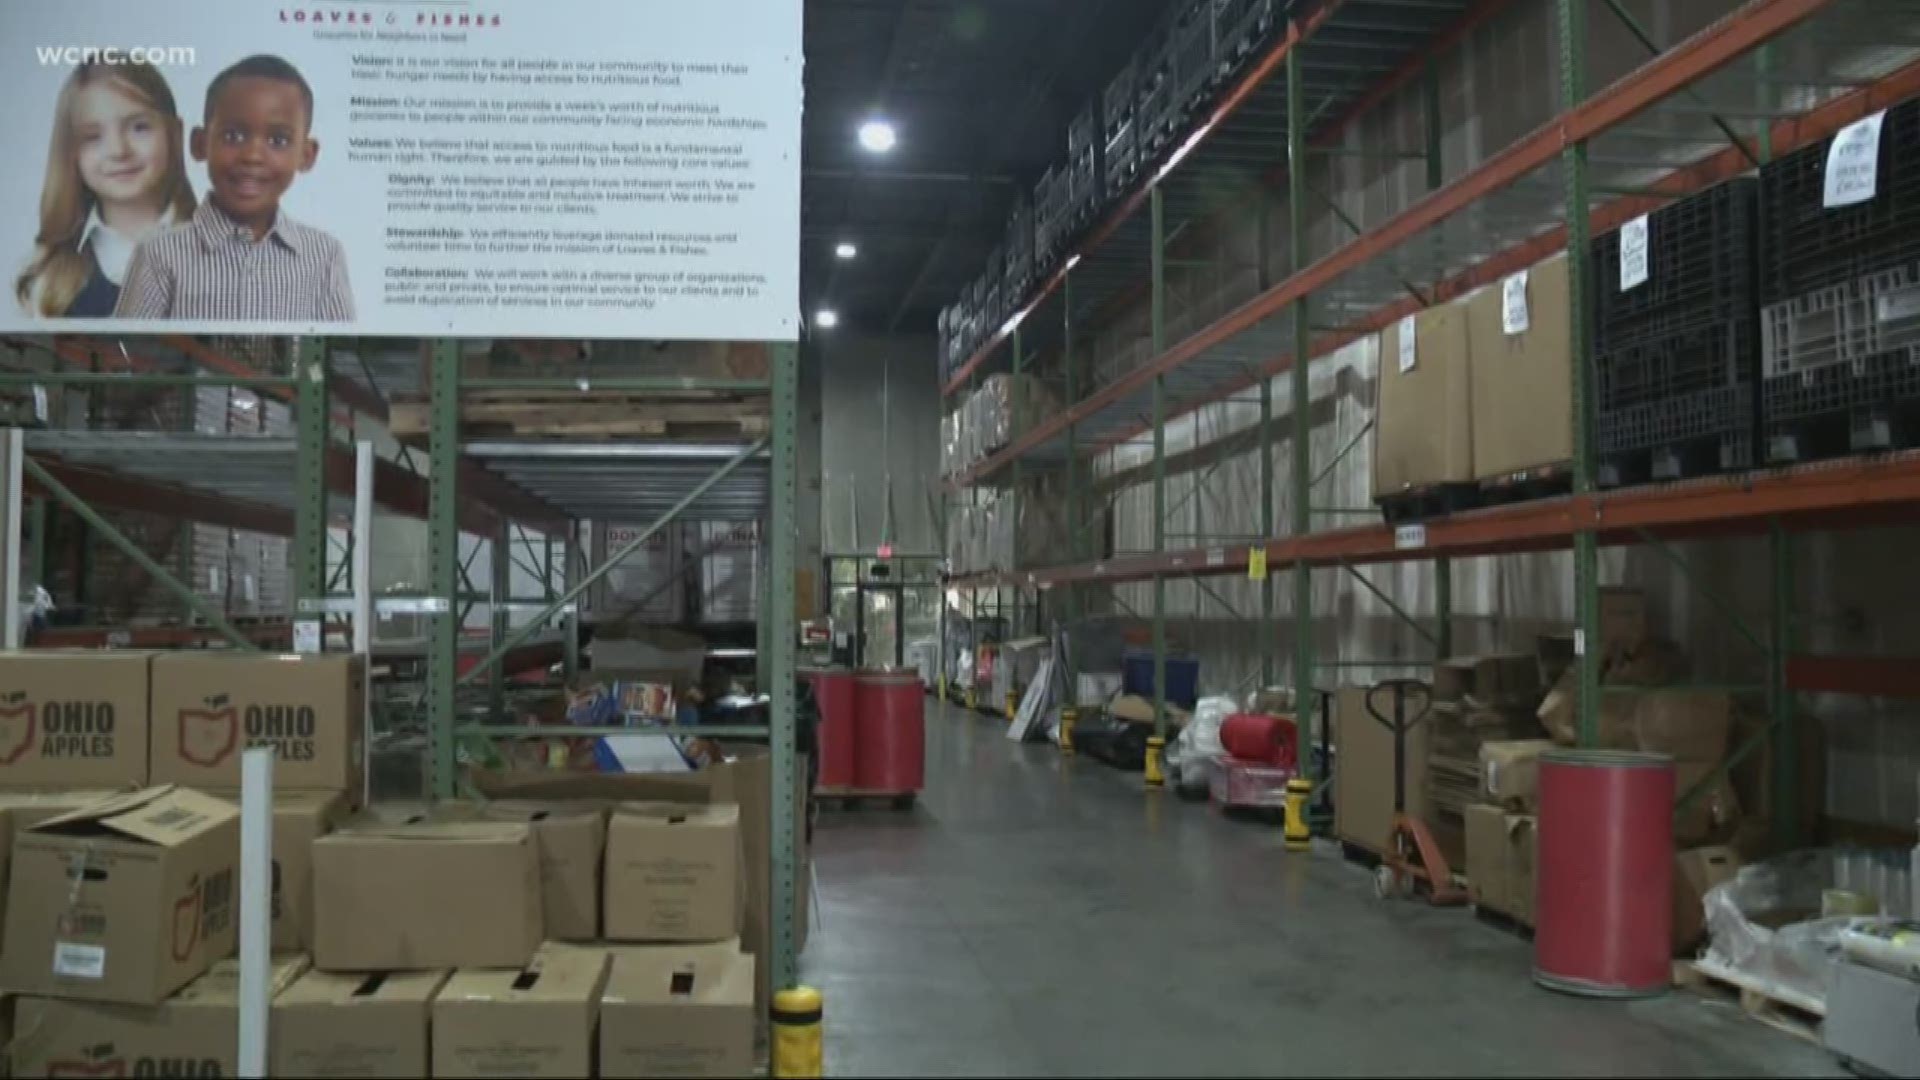 Leaders at the food pantry are warning shoppers to avoid panic buying in order to prevent any future issues.